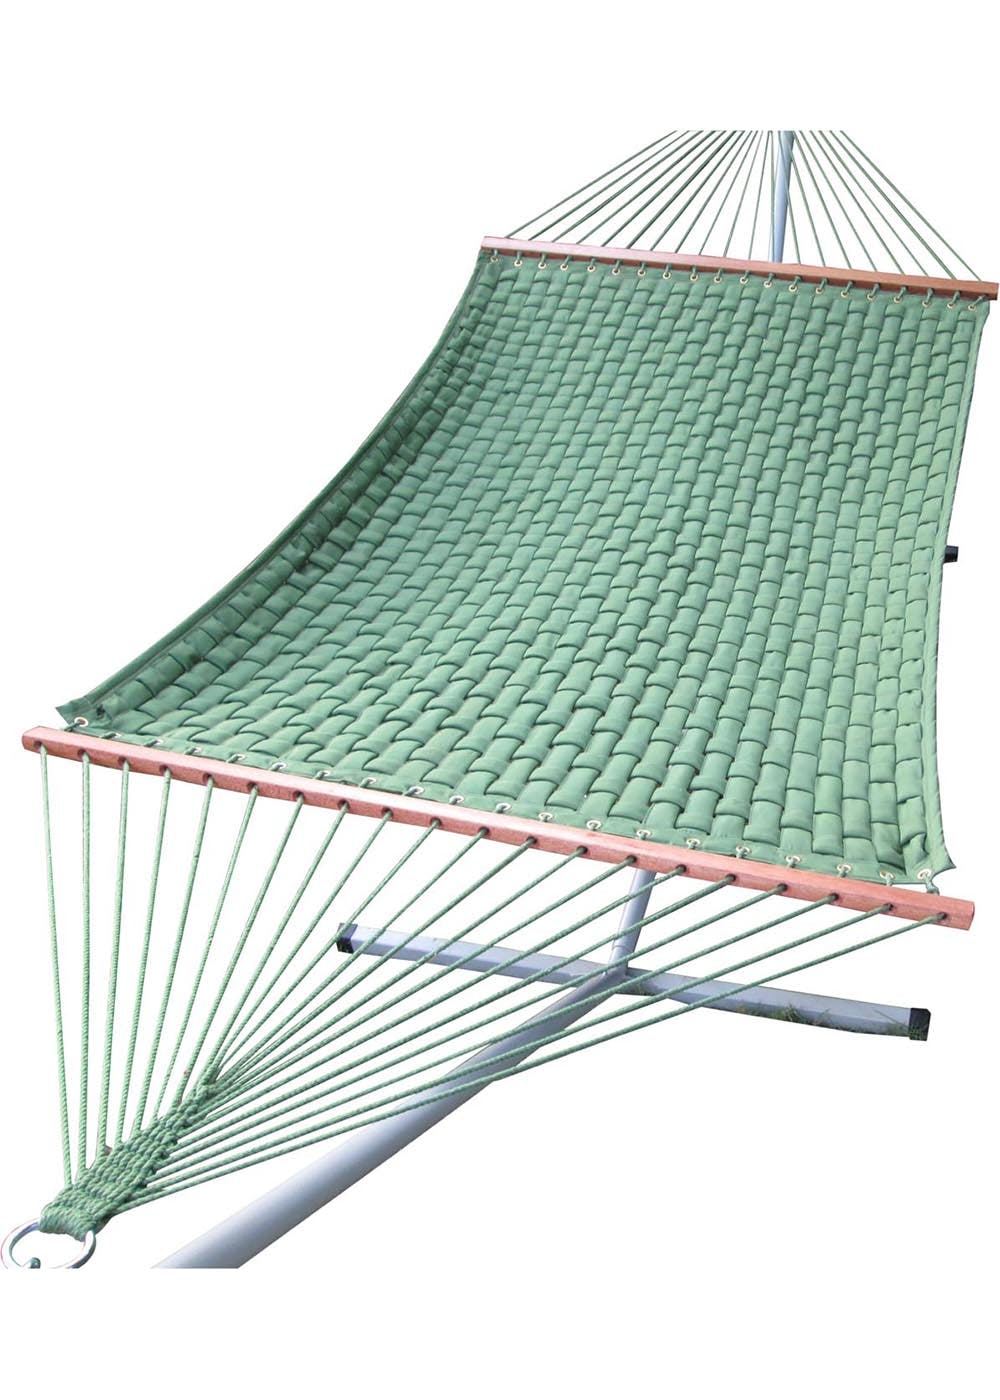 Extra Large Soft Comb Quilted Hammock For Double Person Use, 200 Kg Weight Capacity Garden Green